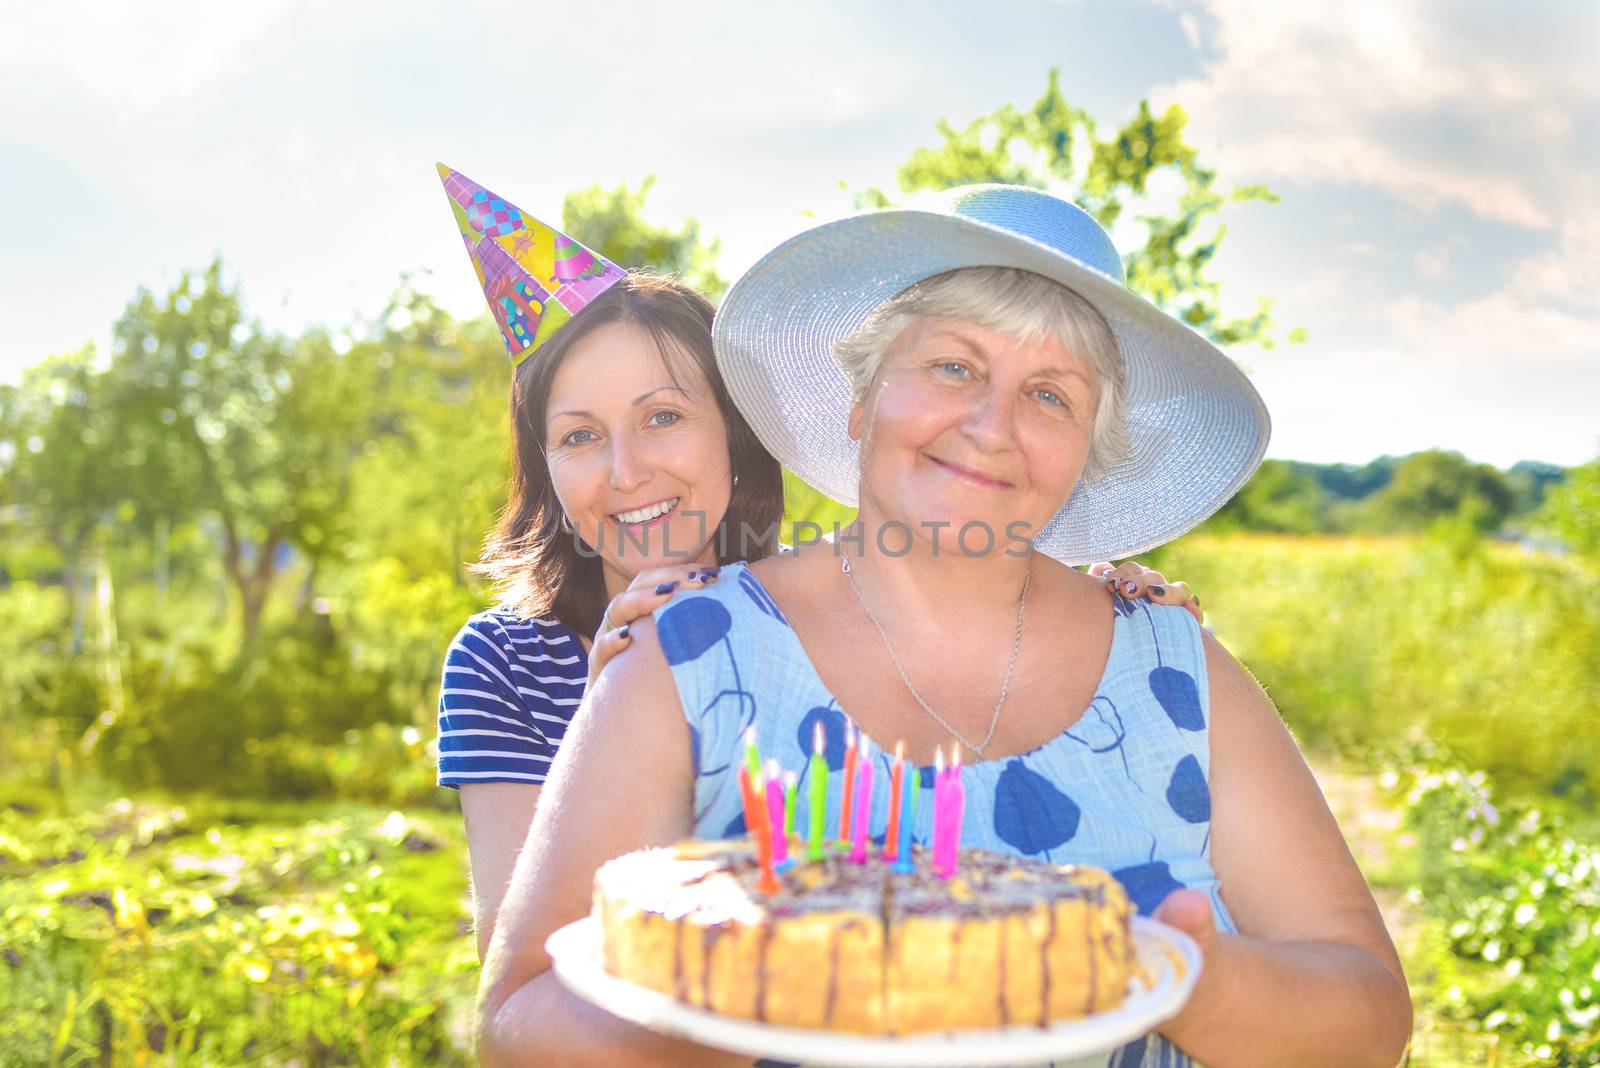 Grandmother's birthday, who with a smile, together with her daughter in the village and holds a birthday homemade cake.